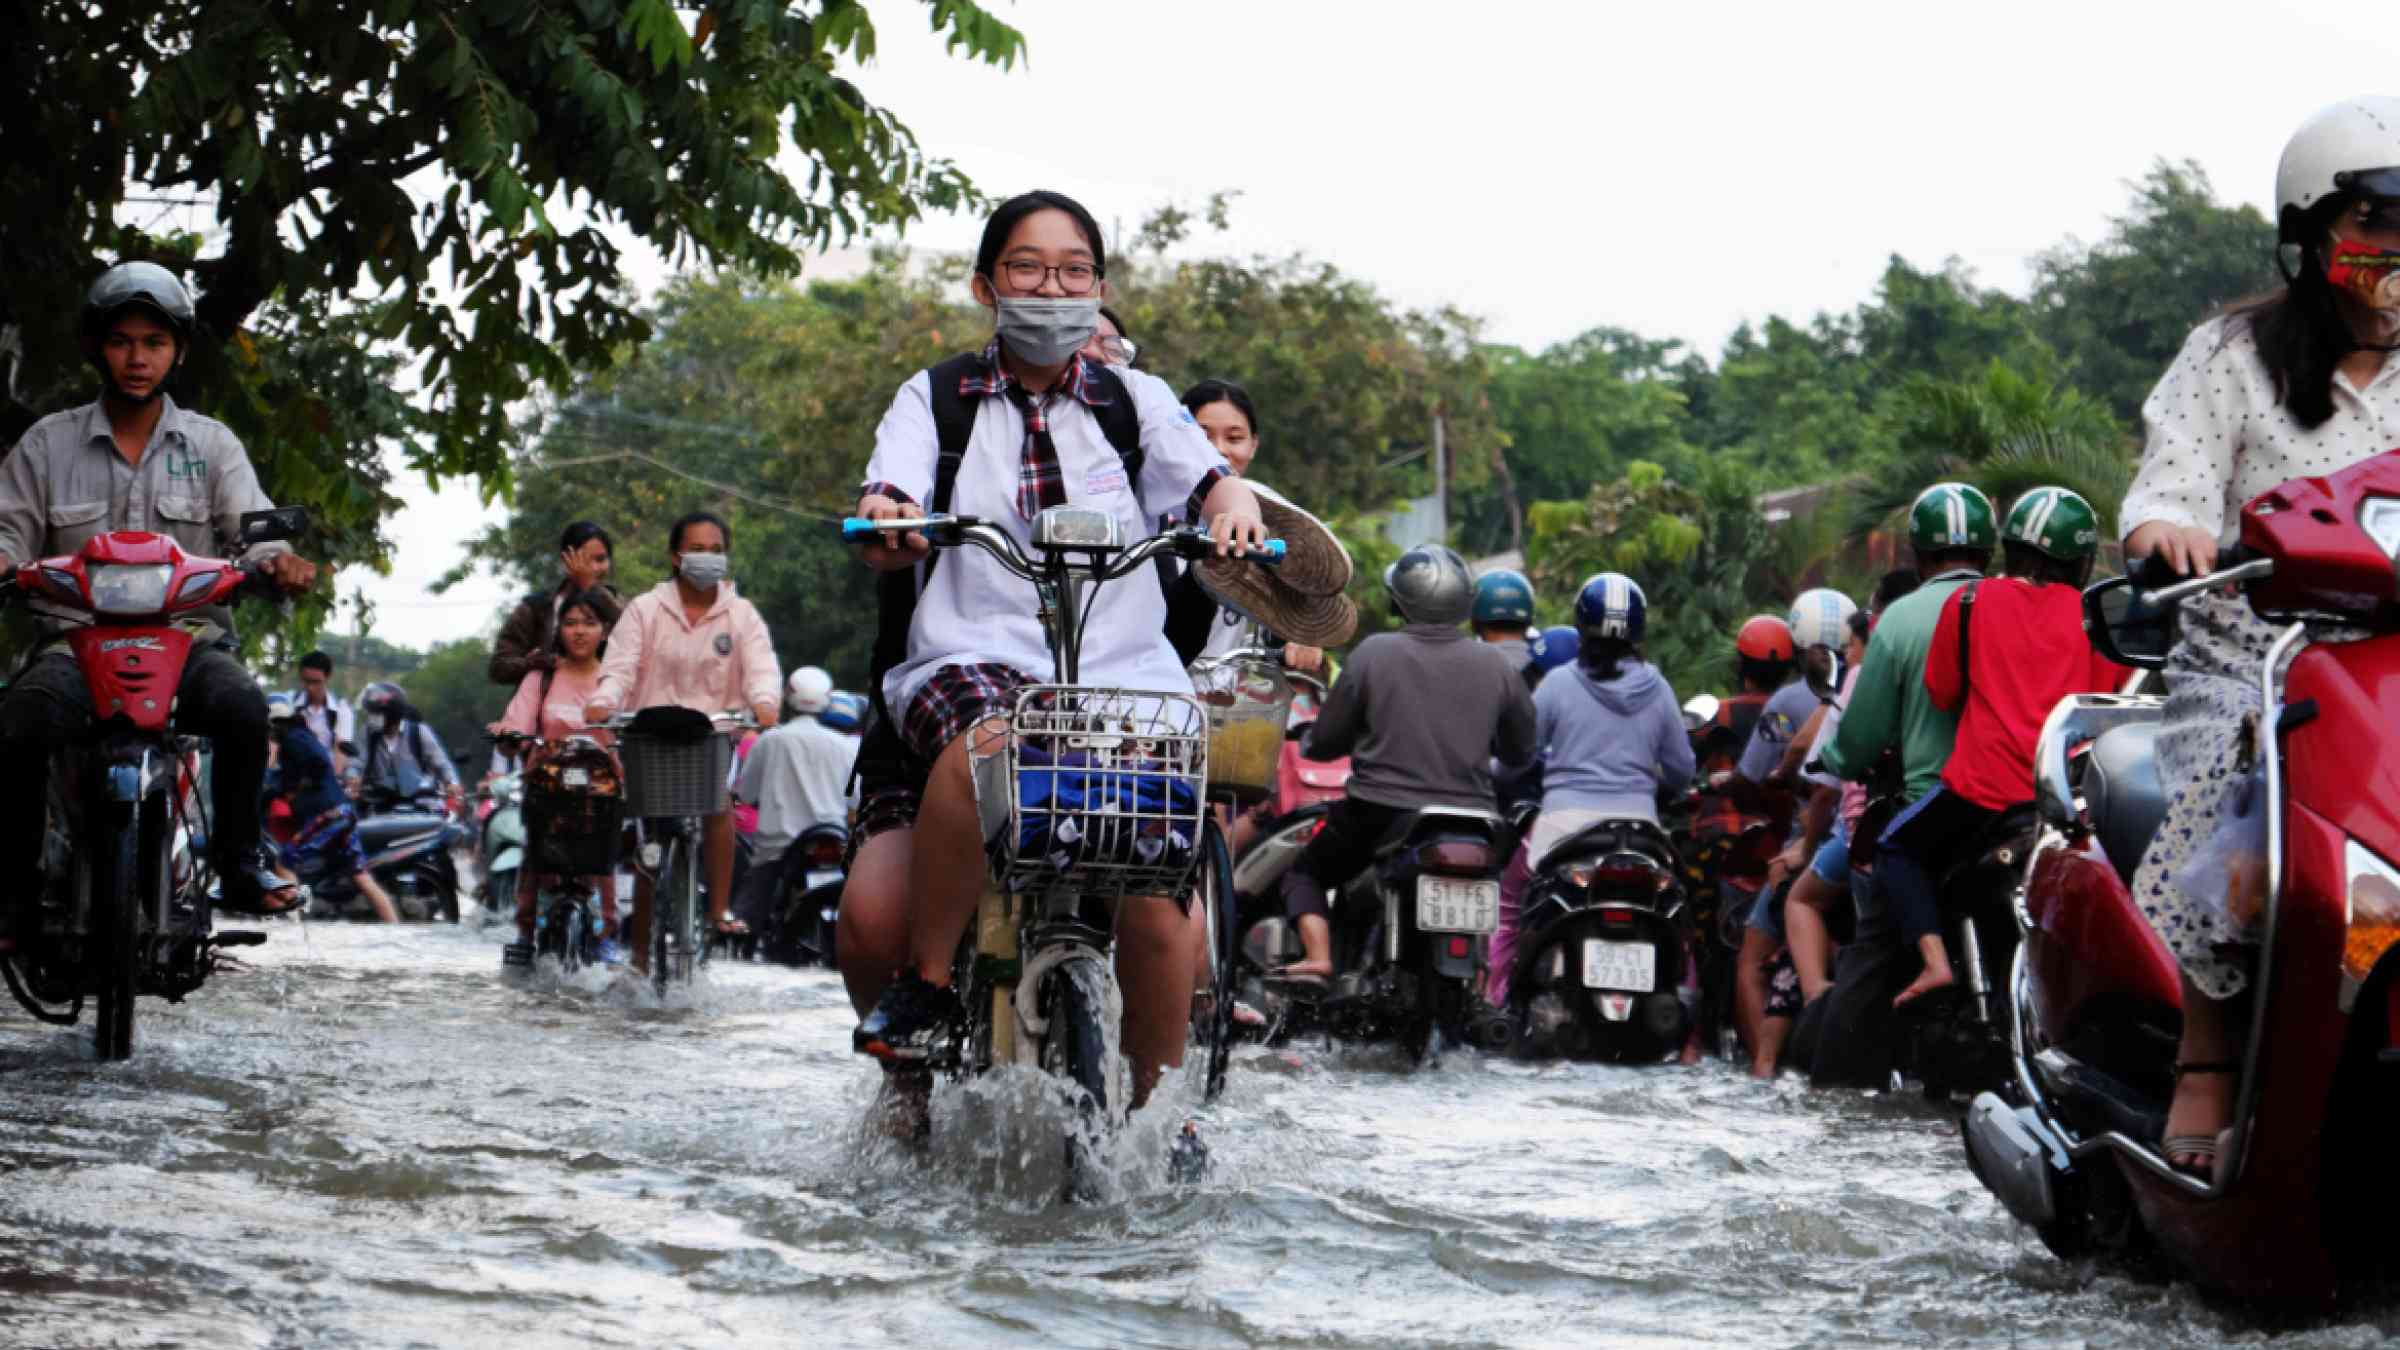 A student rides a bike through the floods in Ho Chi Minh City, Vietnam.